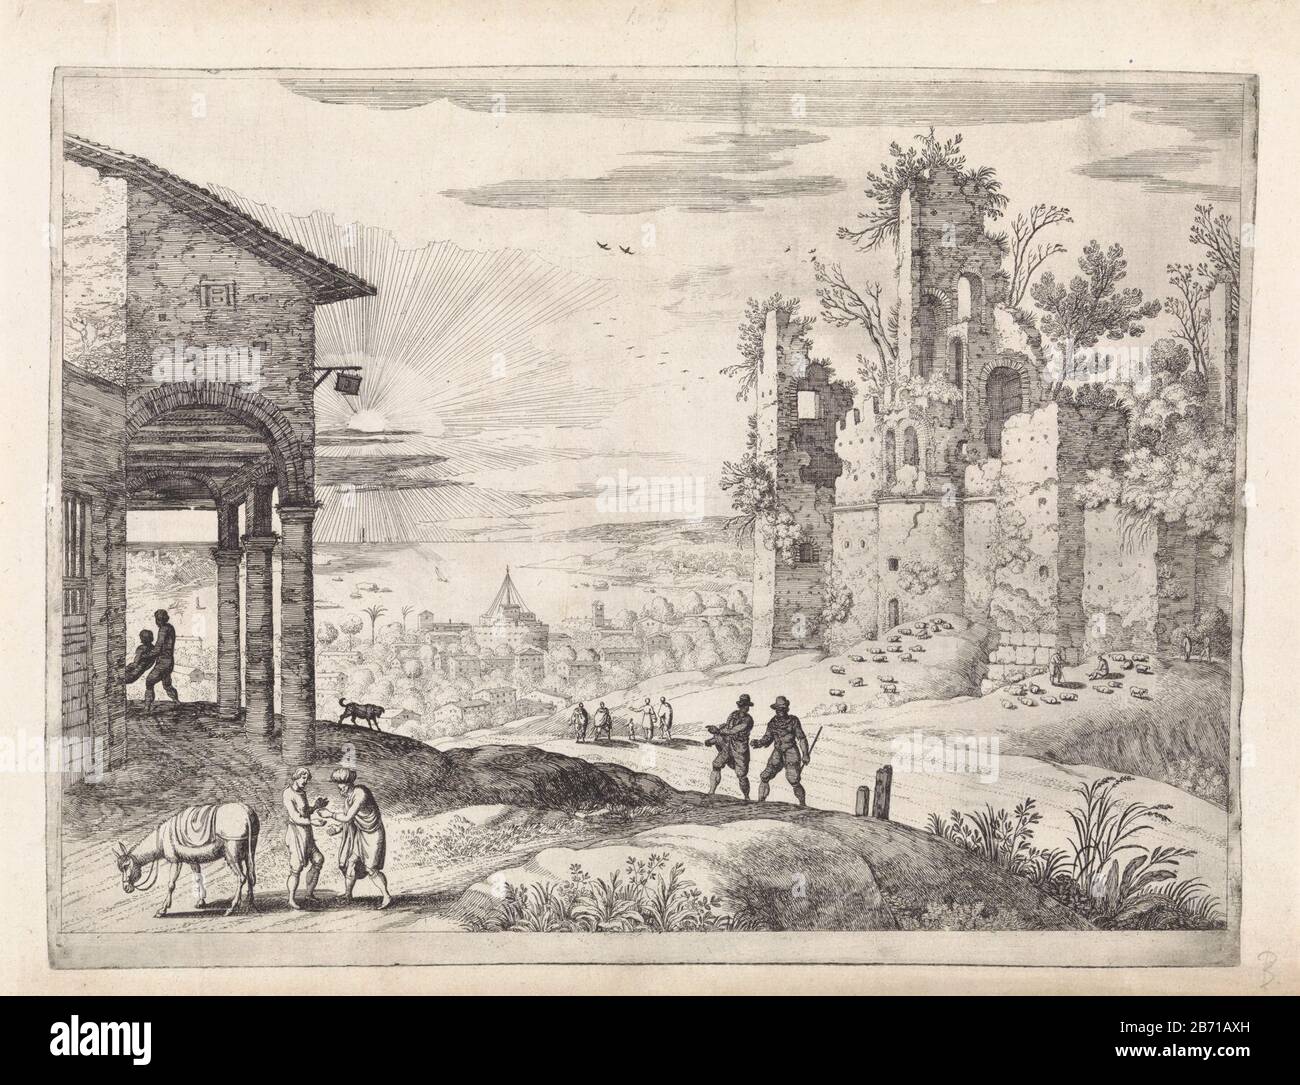 Landschap met de barmhartige Samaritaan bij de herberg Italiaanse landschappen (serietitel) at an inn, the Good Samaritan, who pays the innkeeper to care for the wounded man. The injured passenger is carried inside the inn. Right in the landscape in ruins and in the background a landscape with the Castel Sant'Angelo. In the Bible story in Luke. 10: 25-37. Print out a series of Italian landschappen. Manufacturer : printmaker Willem van Nieulandt (II) (listed building), designed by Paul Bril (listed building) Dated: 1594 - 1635 Physical features: etching; proofing material: paper Technique: etch Stock Photo